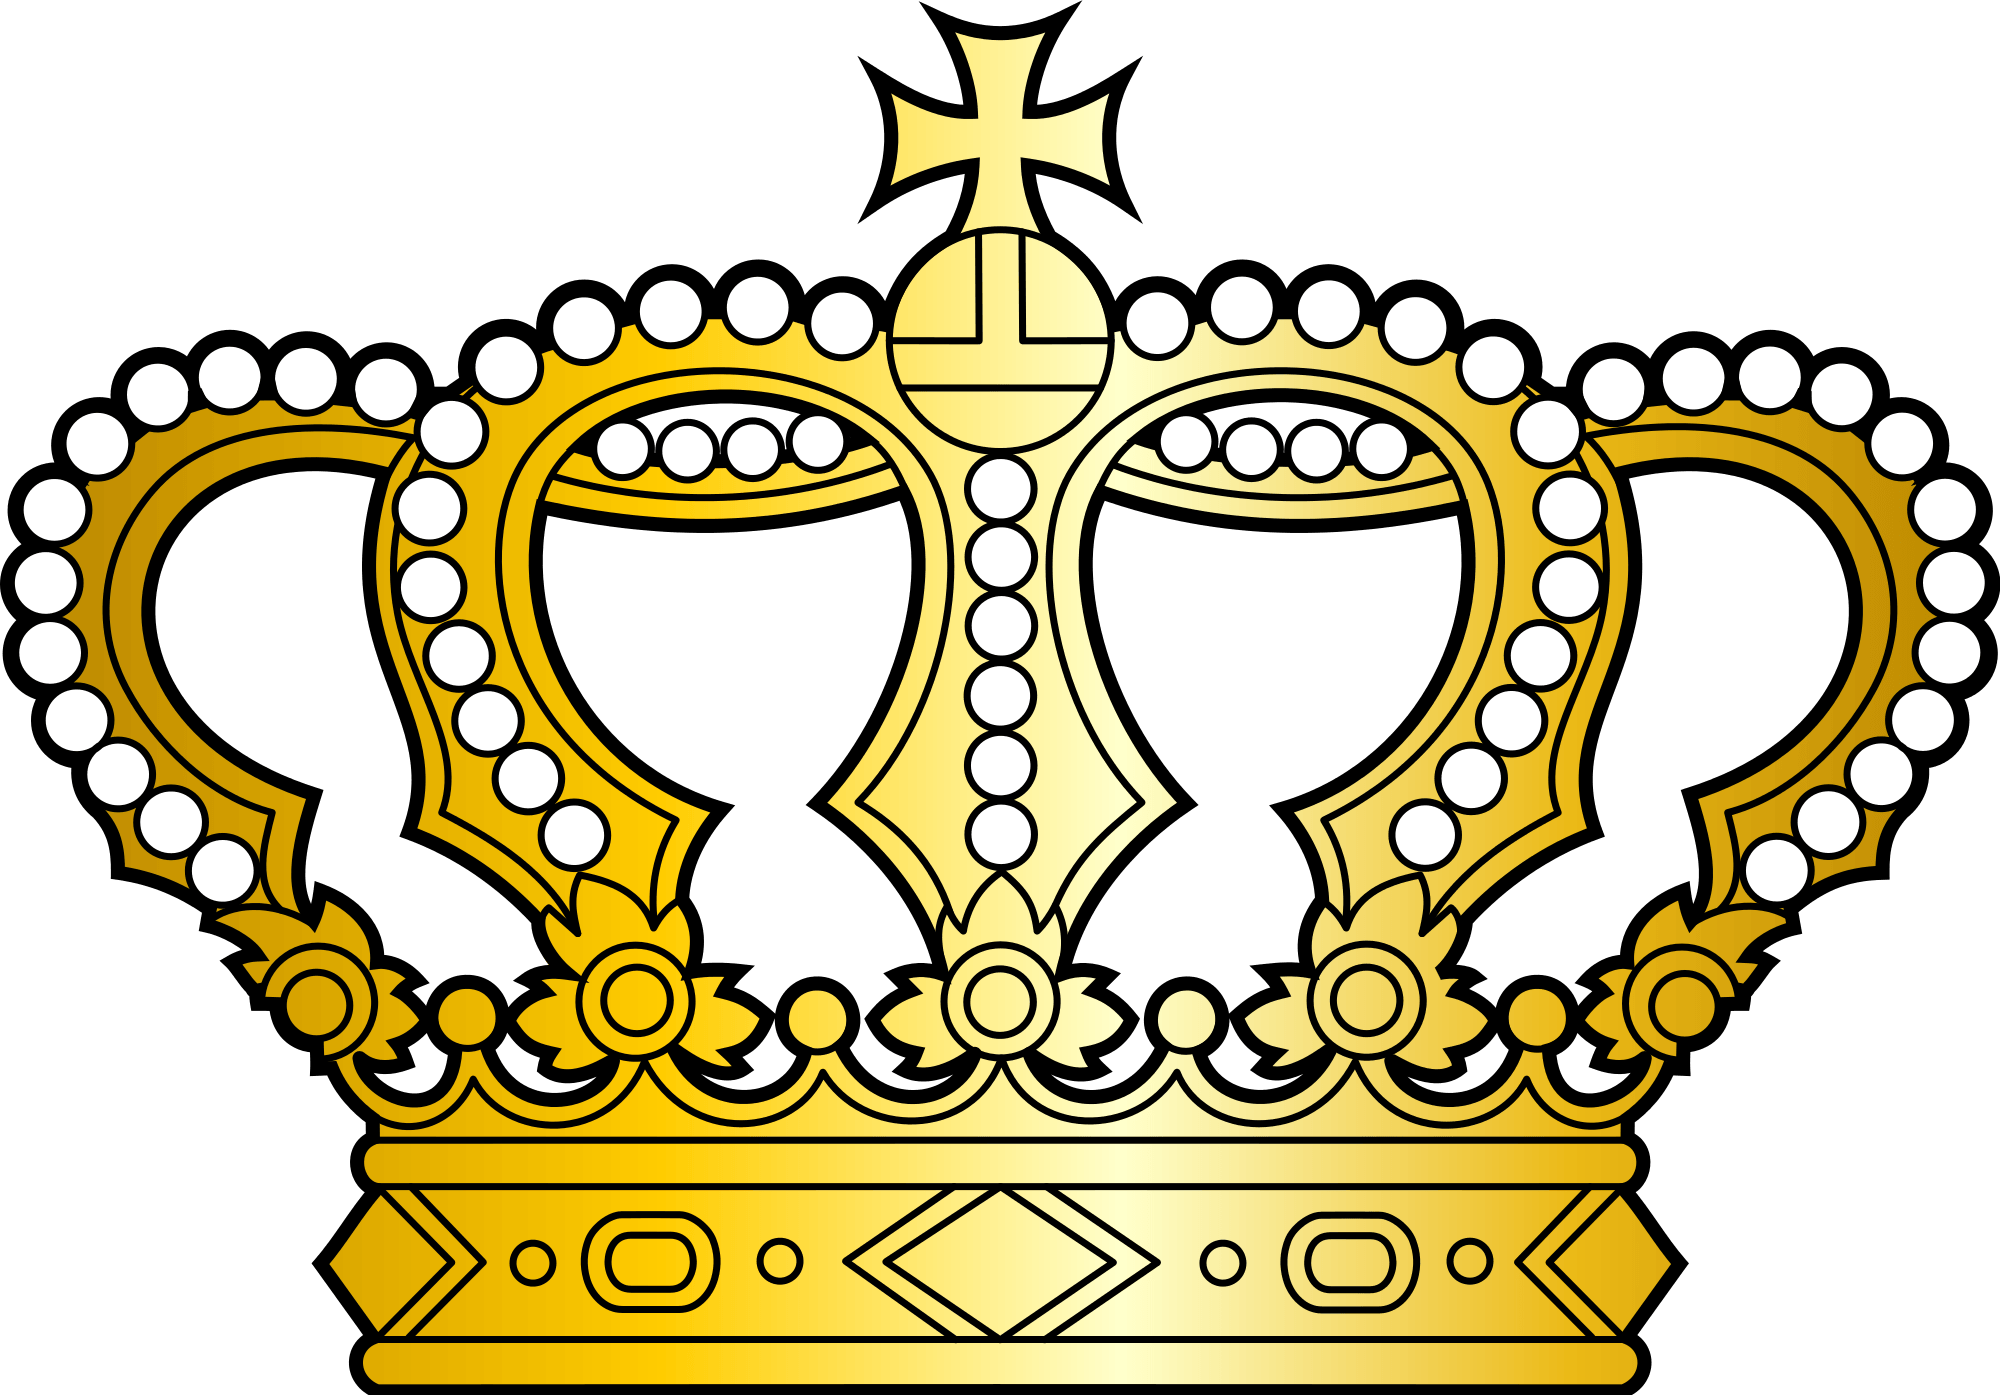 Gold Cross with Crown Logo - File:Georgian golden crown with pearls and cross.svg - Wikimedia Commons